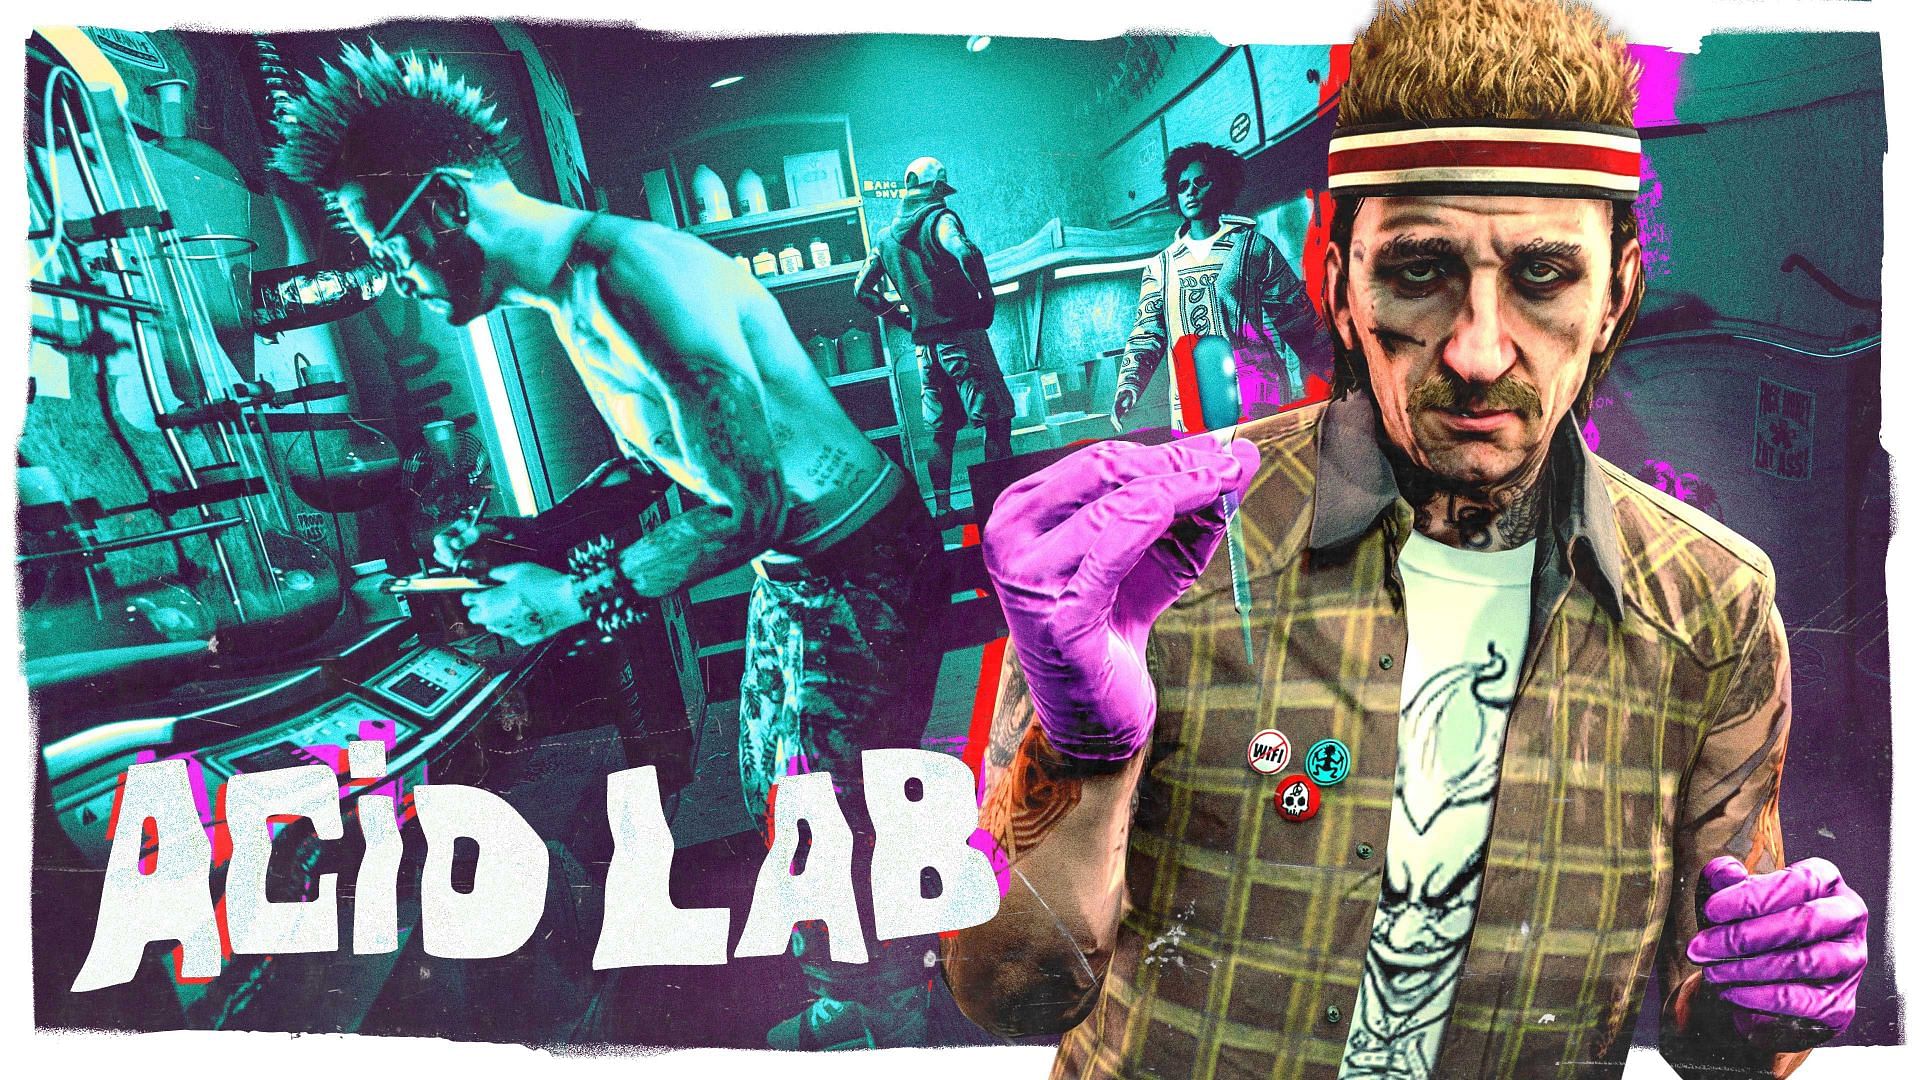 The Acid Lab is the newest business in GTA Online (Image via Rockstar Games)